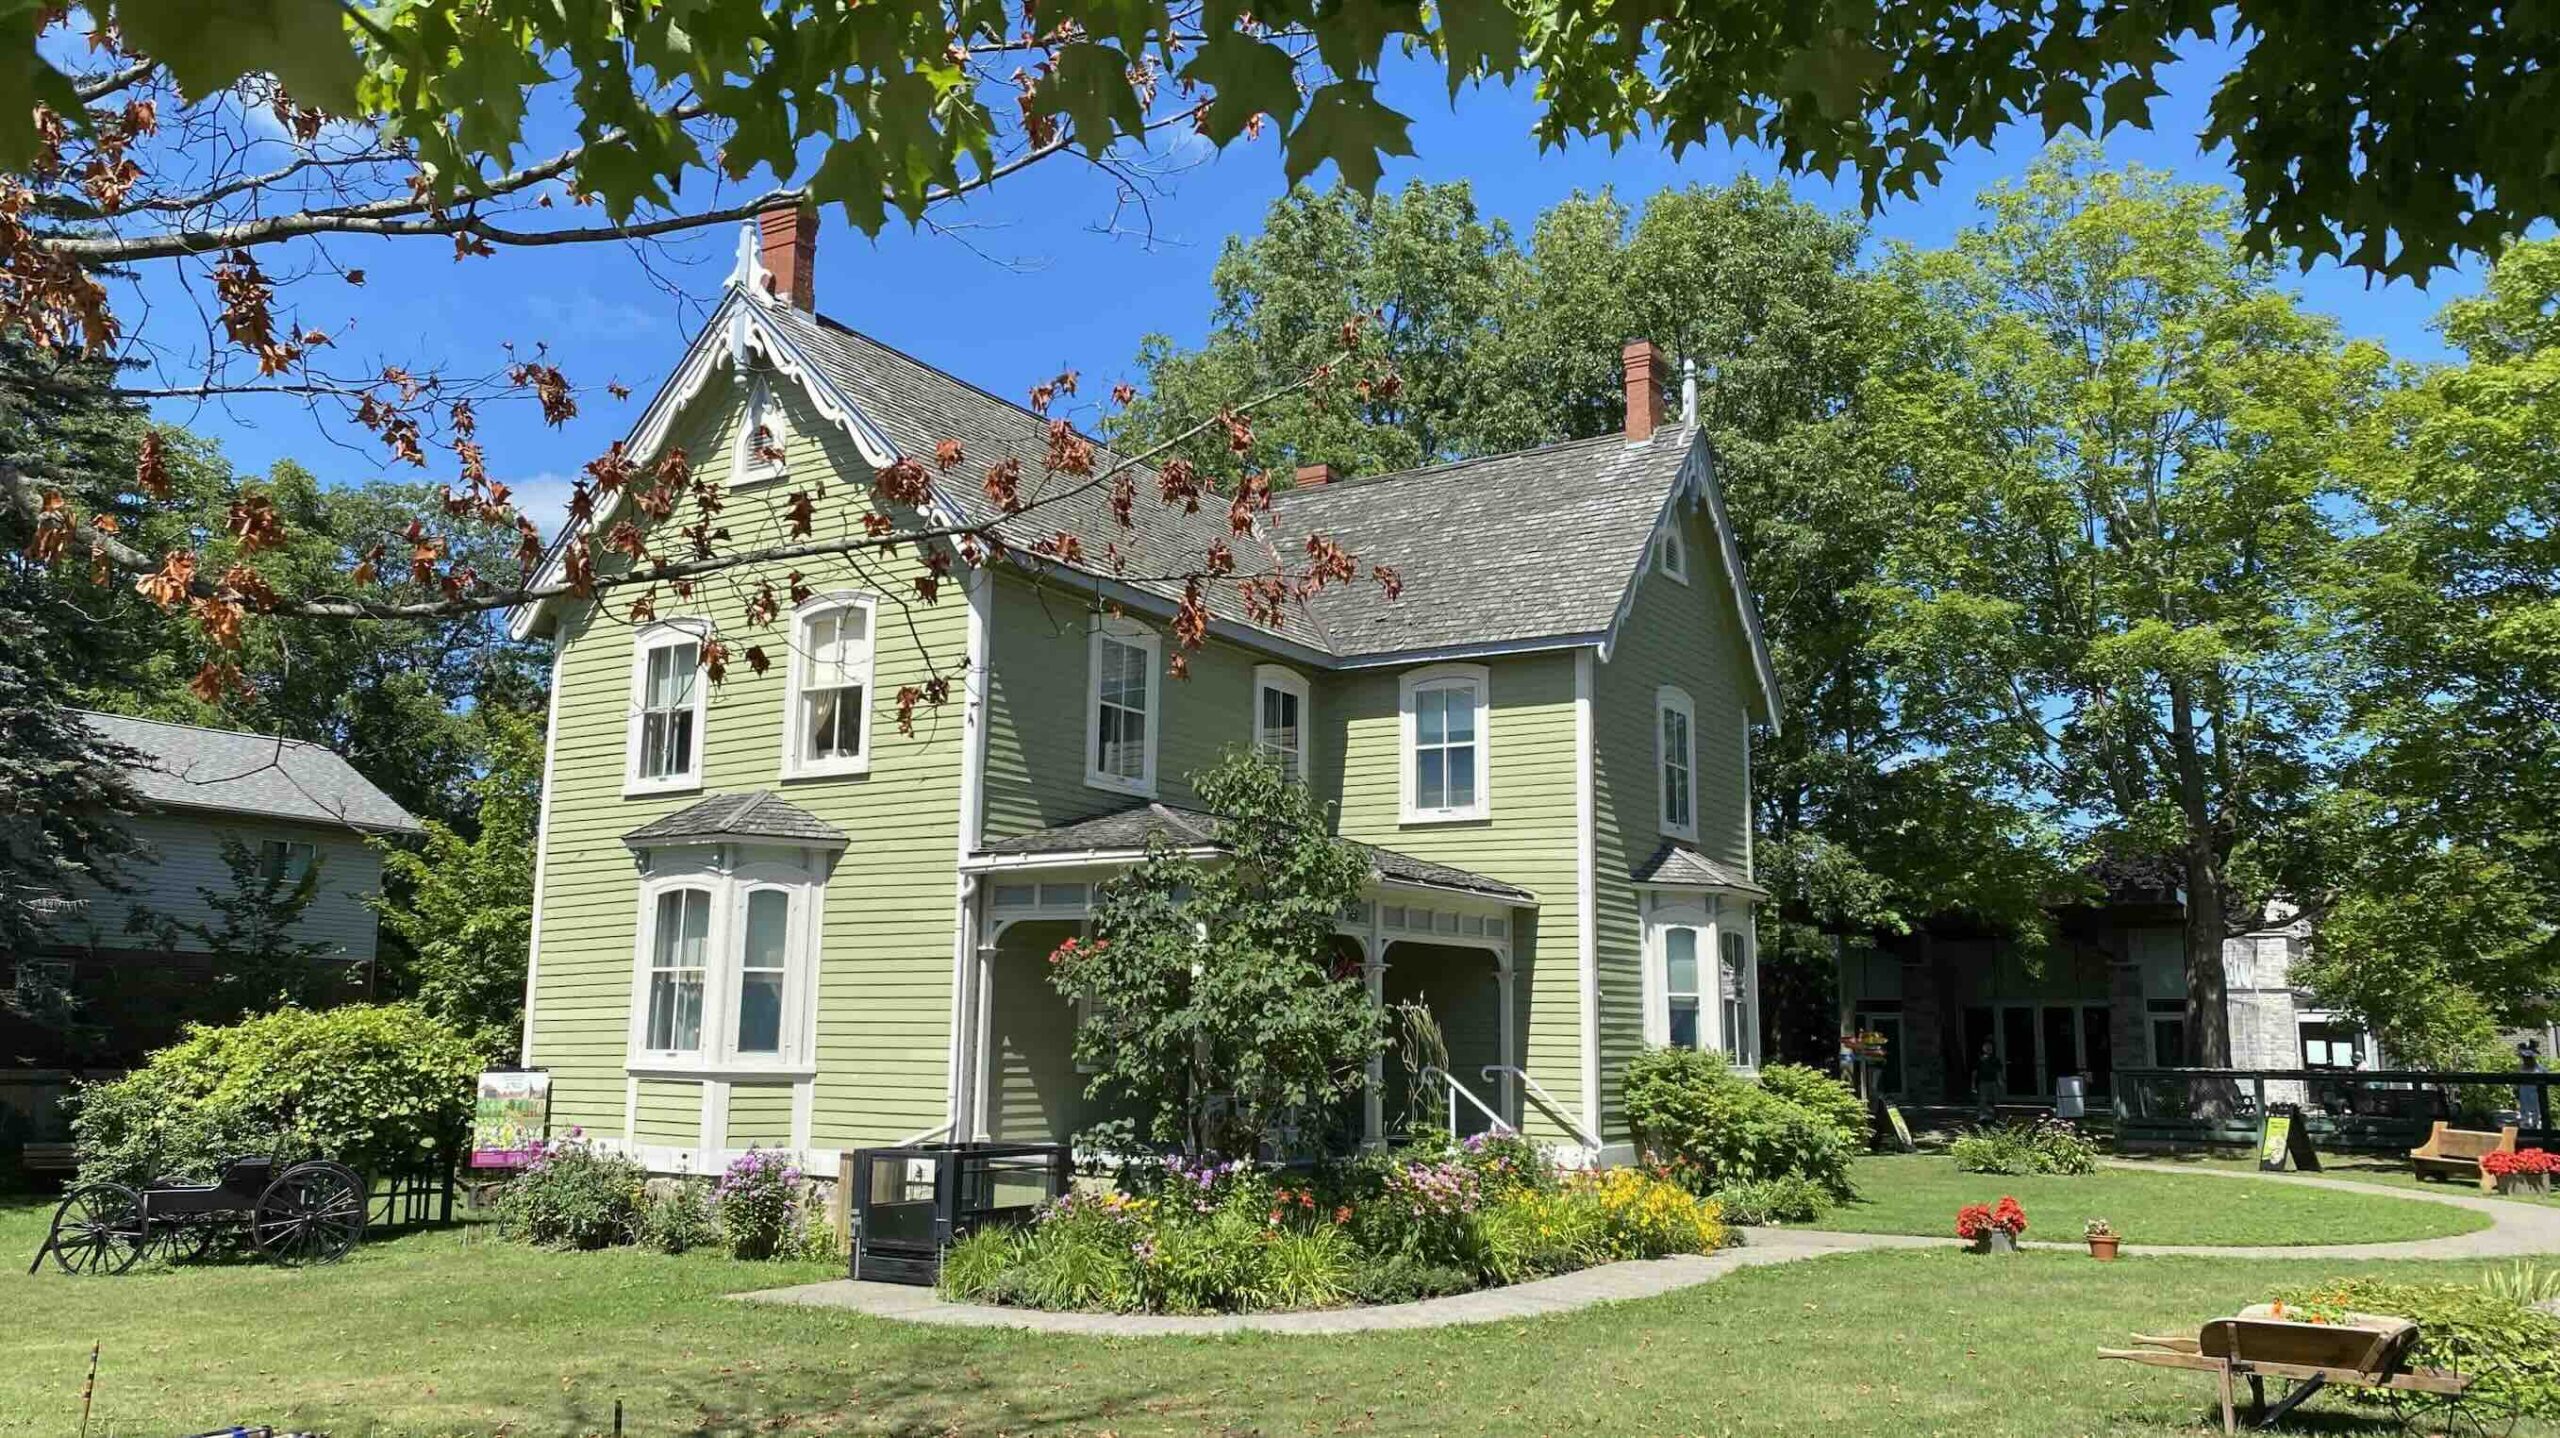 Bethune House one of the best cultural attractions in Muskoka photo by Kim Kerr